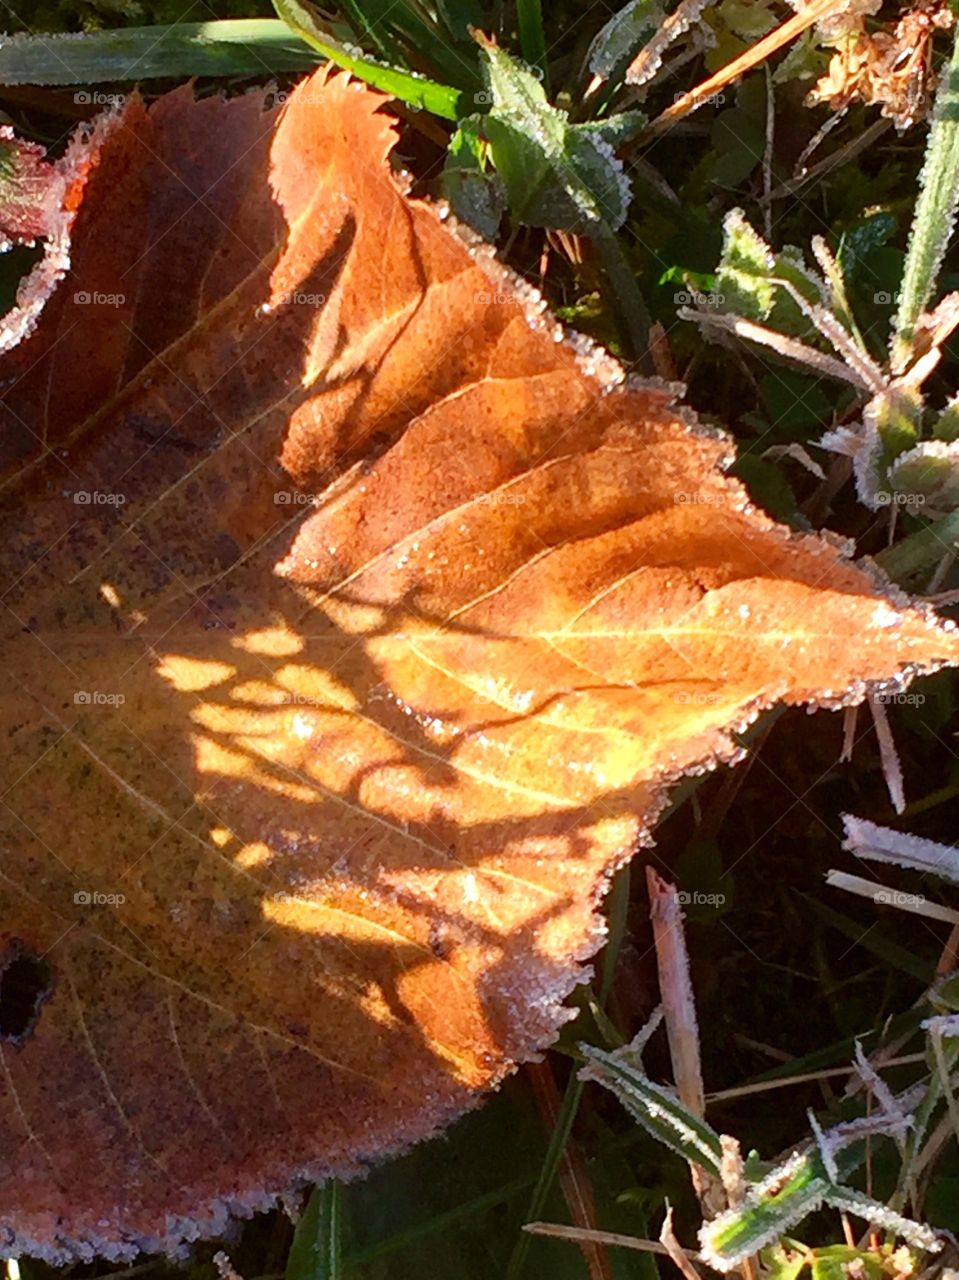 Frost on a leaf